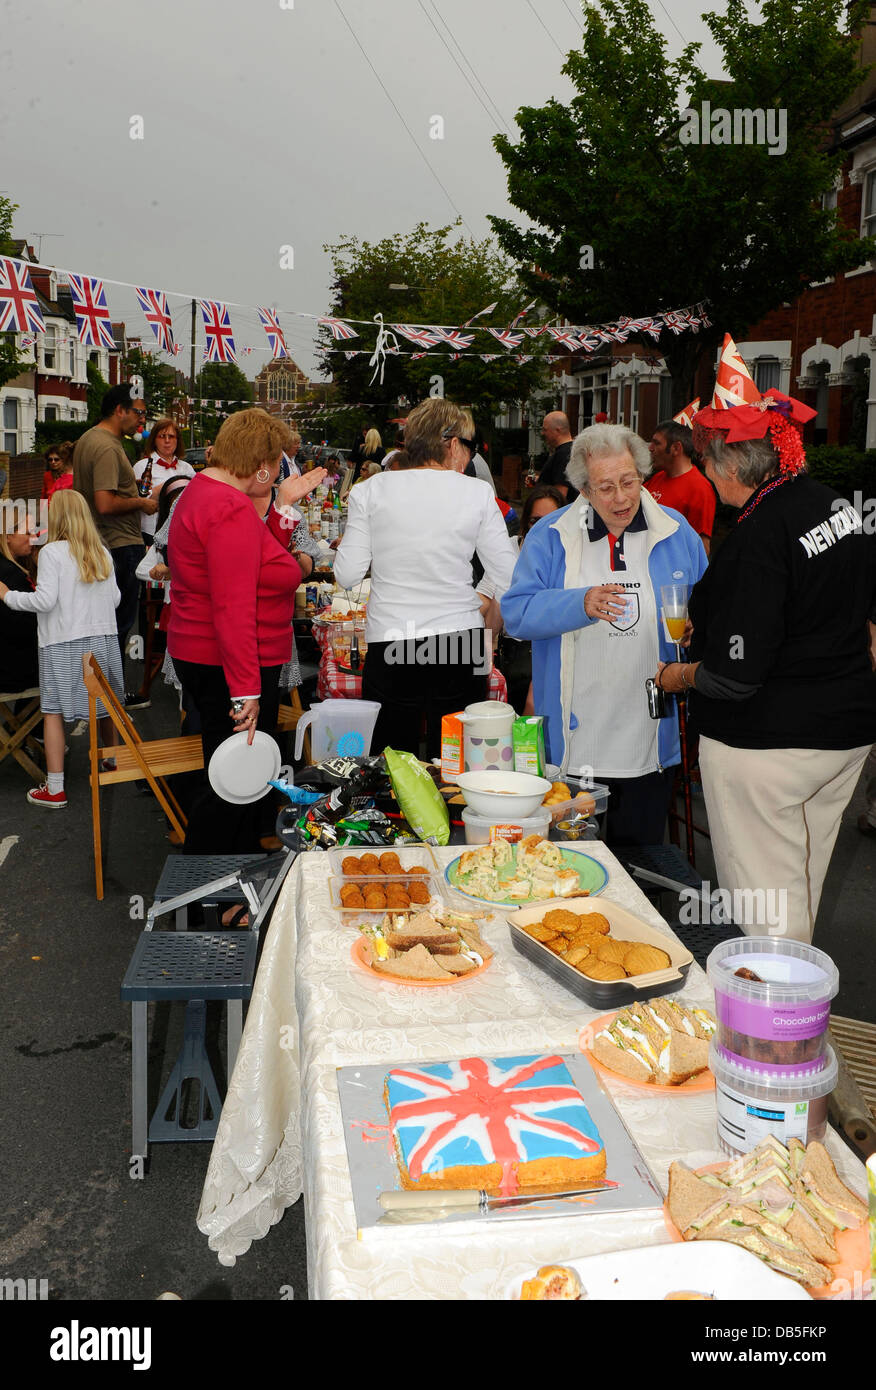 Royal Wedding Street party Held at Leicester Road, East Finchley, North London. England. London, England - 29.04.11 Stock Photo